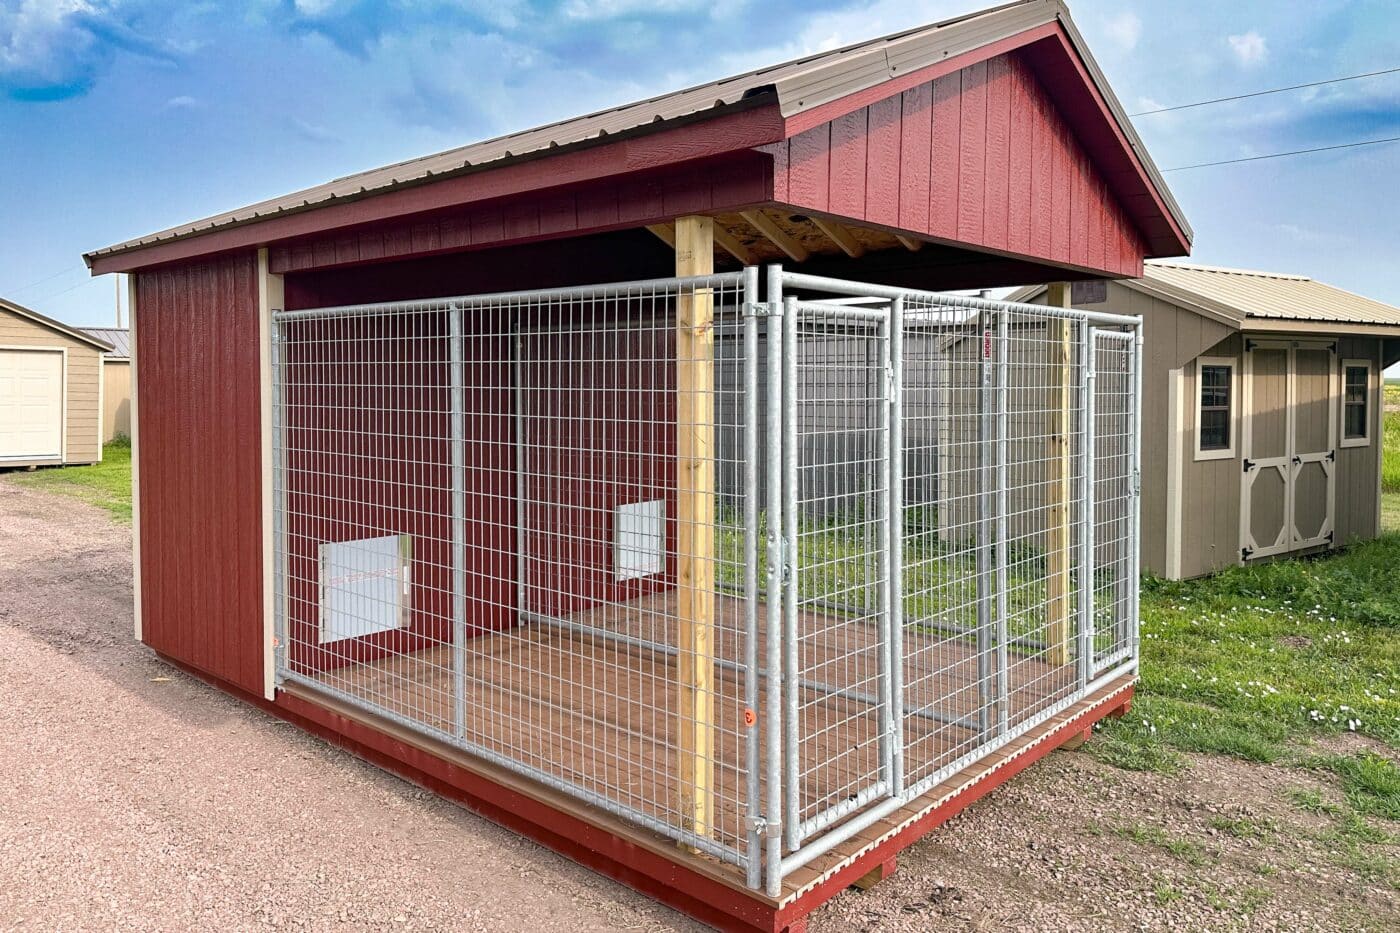 Red Dog Kennel Shed at storage shed lot